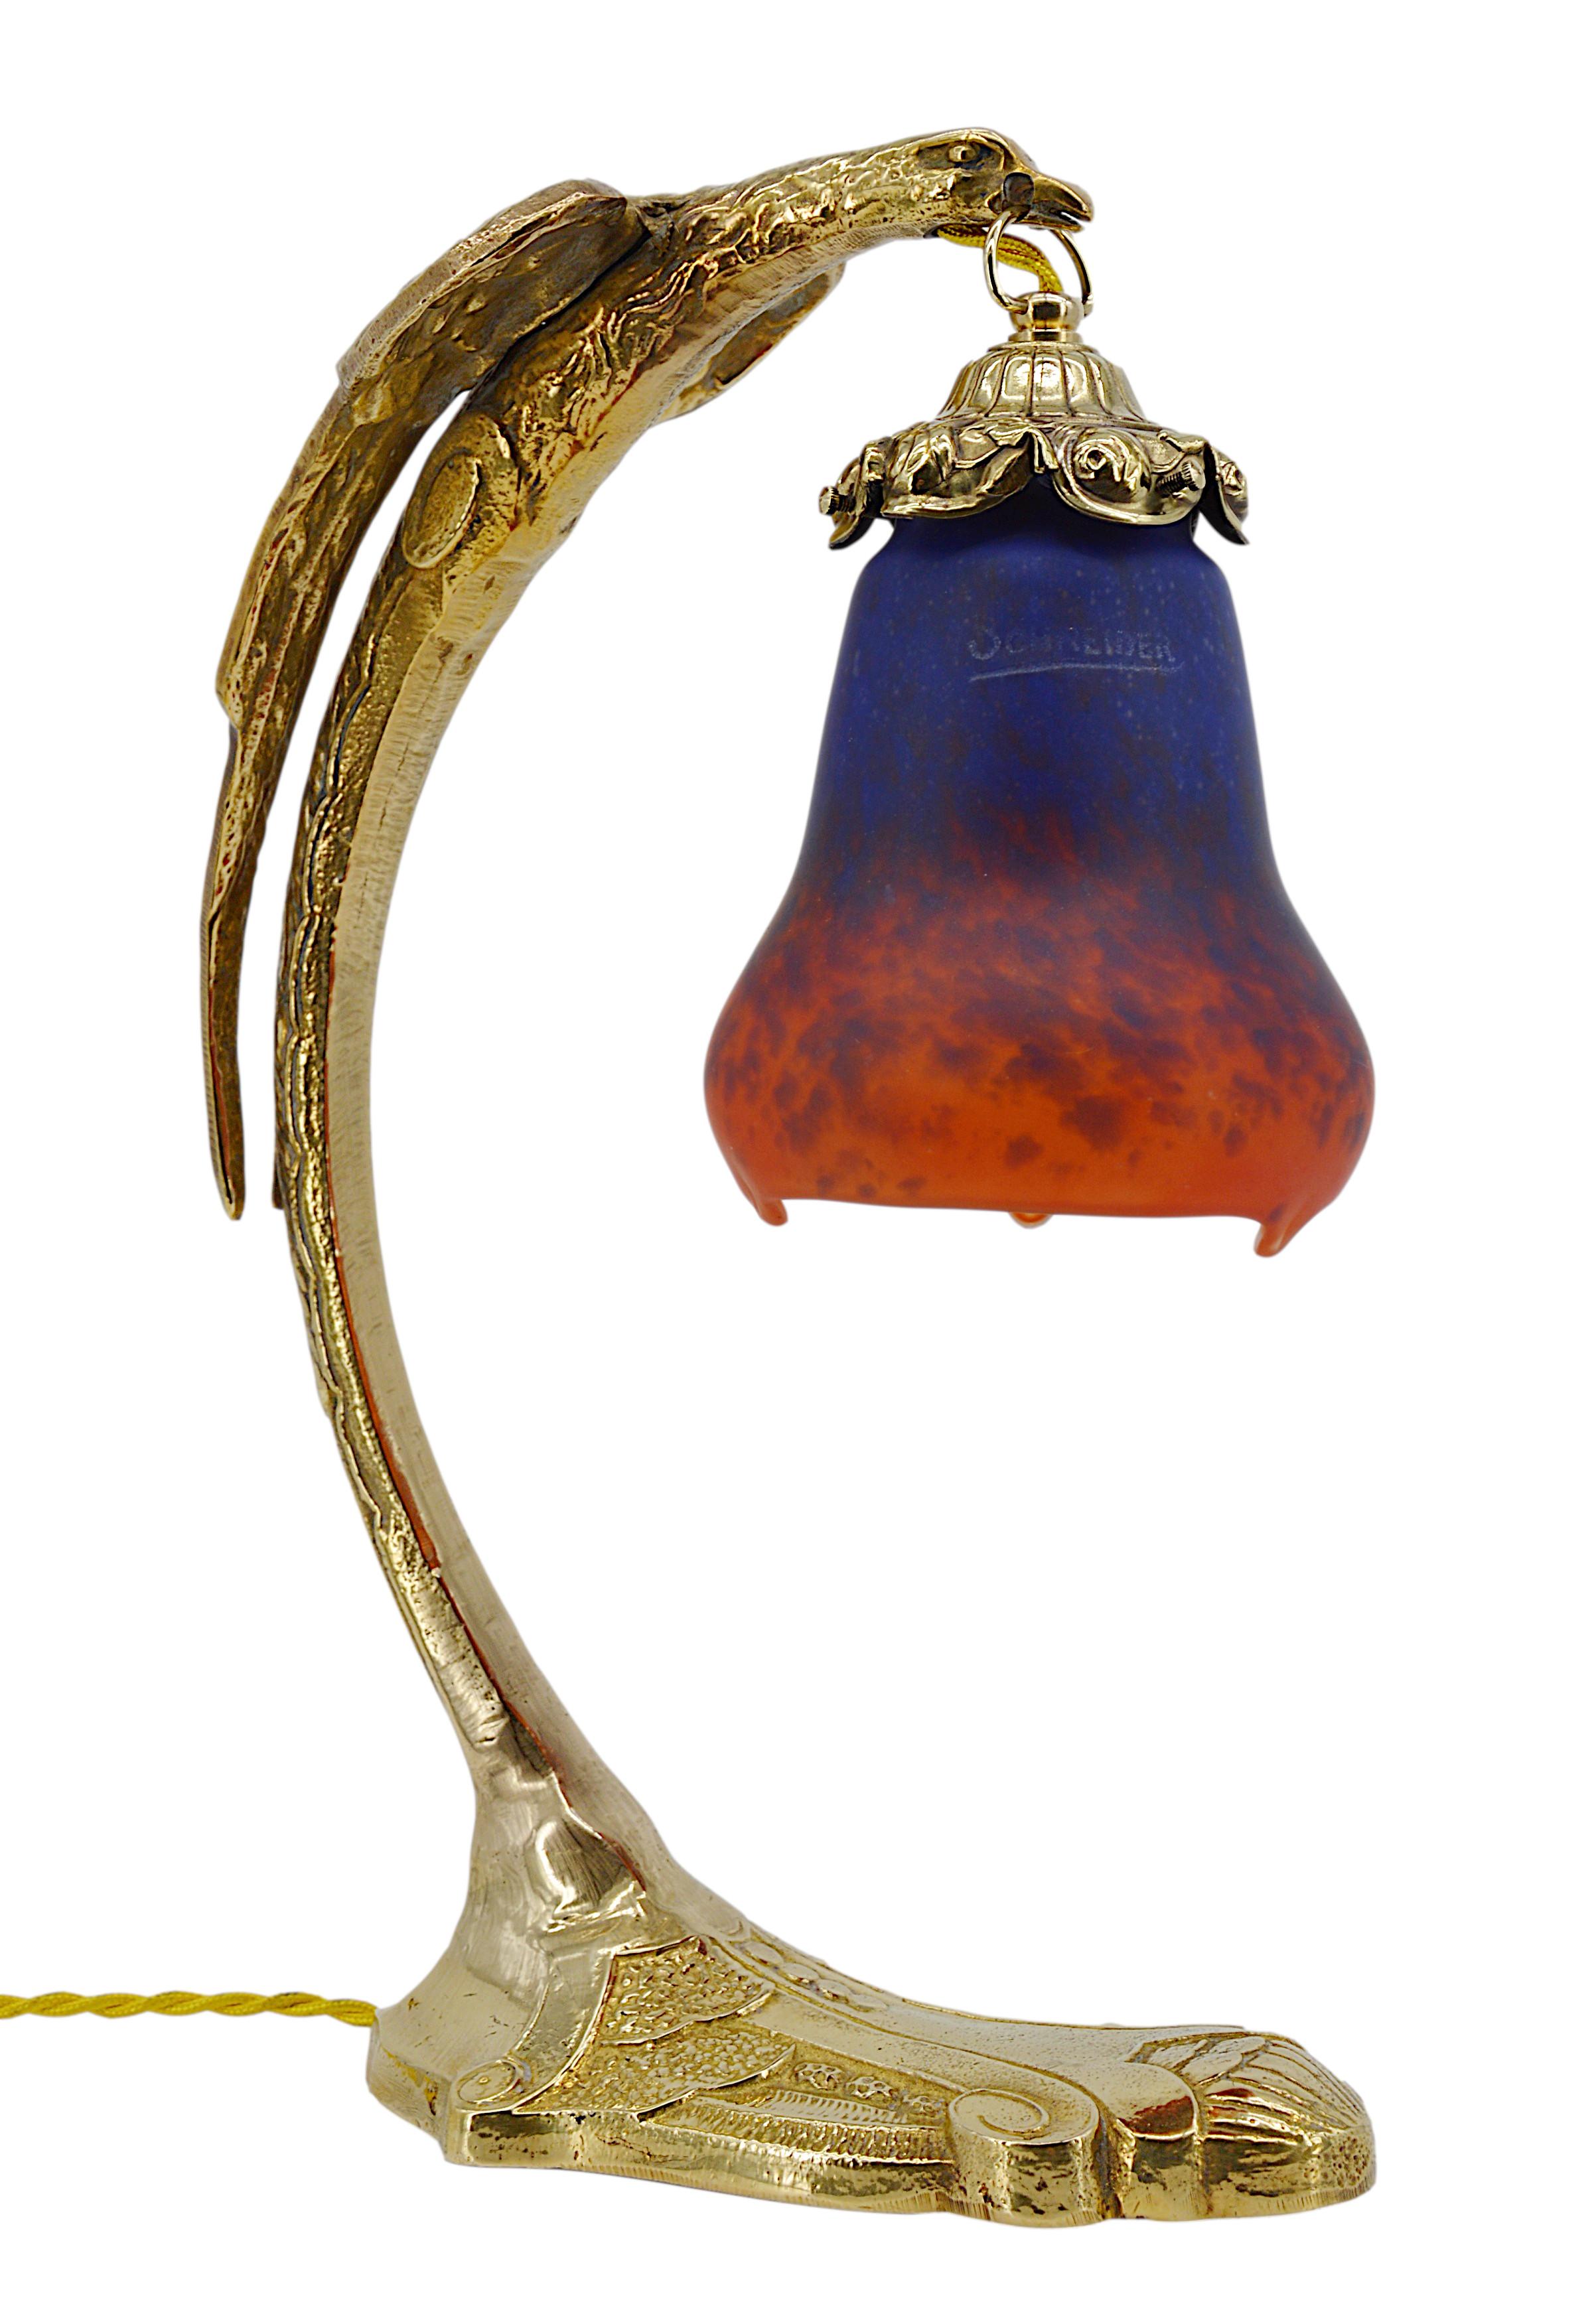 French Art Deco table/desk lamp by Charles Schneider (Epinay-sur-Seine, Paris) and Charles Ranc (Paris), France, 1920s.
Blown double glass shade stretched with pliers by Charles Schneider at its bronze eagle base by Charles Ranc. Colors : Dark blue